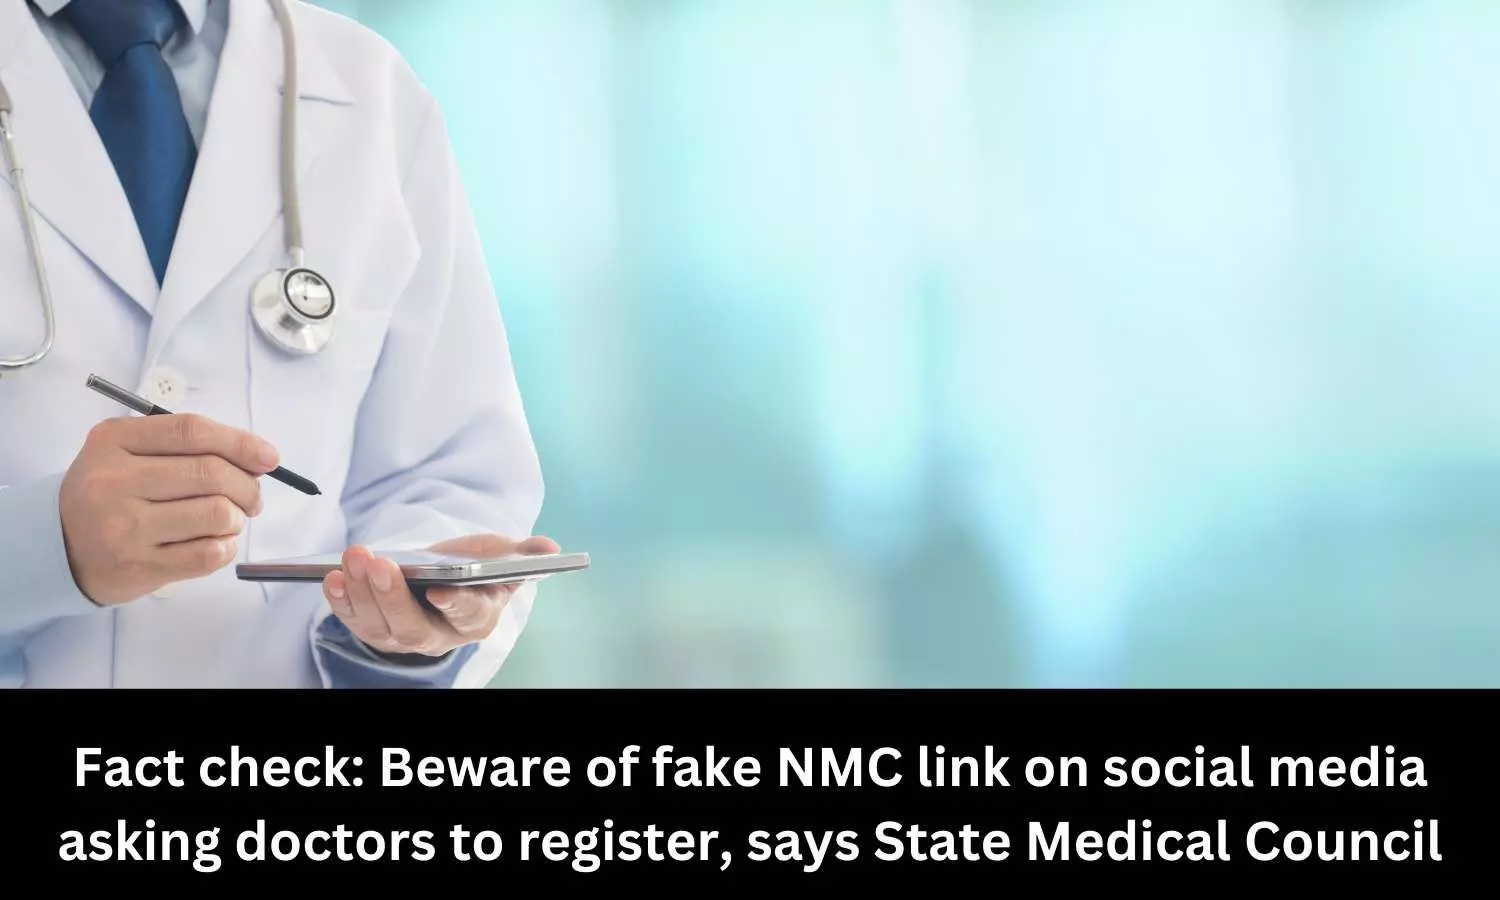 Beware of fake NMC link on social media asking doctors to register: State Medical Council